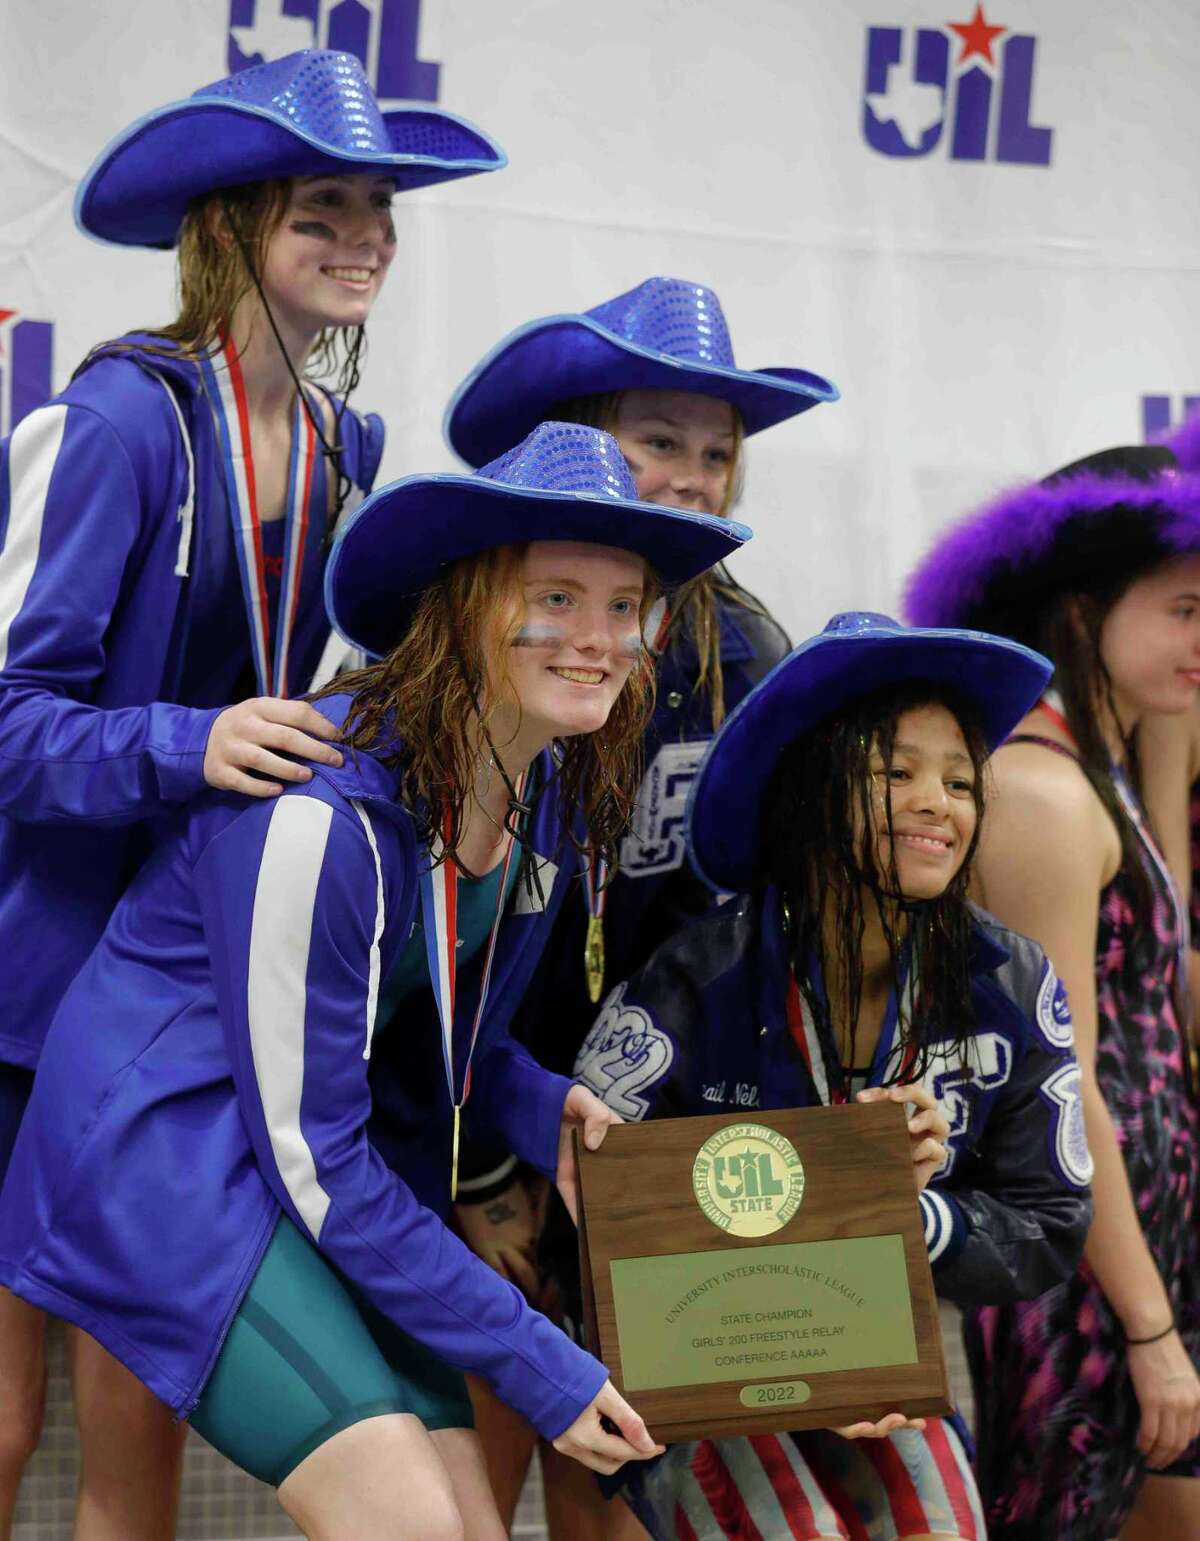 Friendswood earned the gold medal in the Class 5A girls 200-yard freestyle relay Saturday at the UIL State Swimming and Diving Championships in Austin. Team members are Leah Givens, Peyton Becker, Andelynn Jeanes and Abigail Nelson.